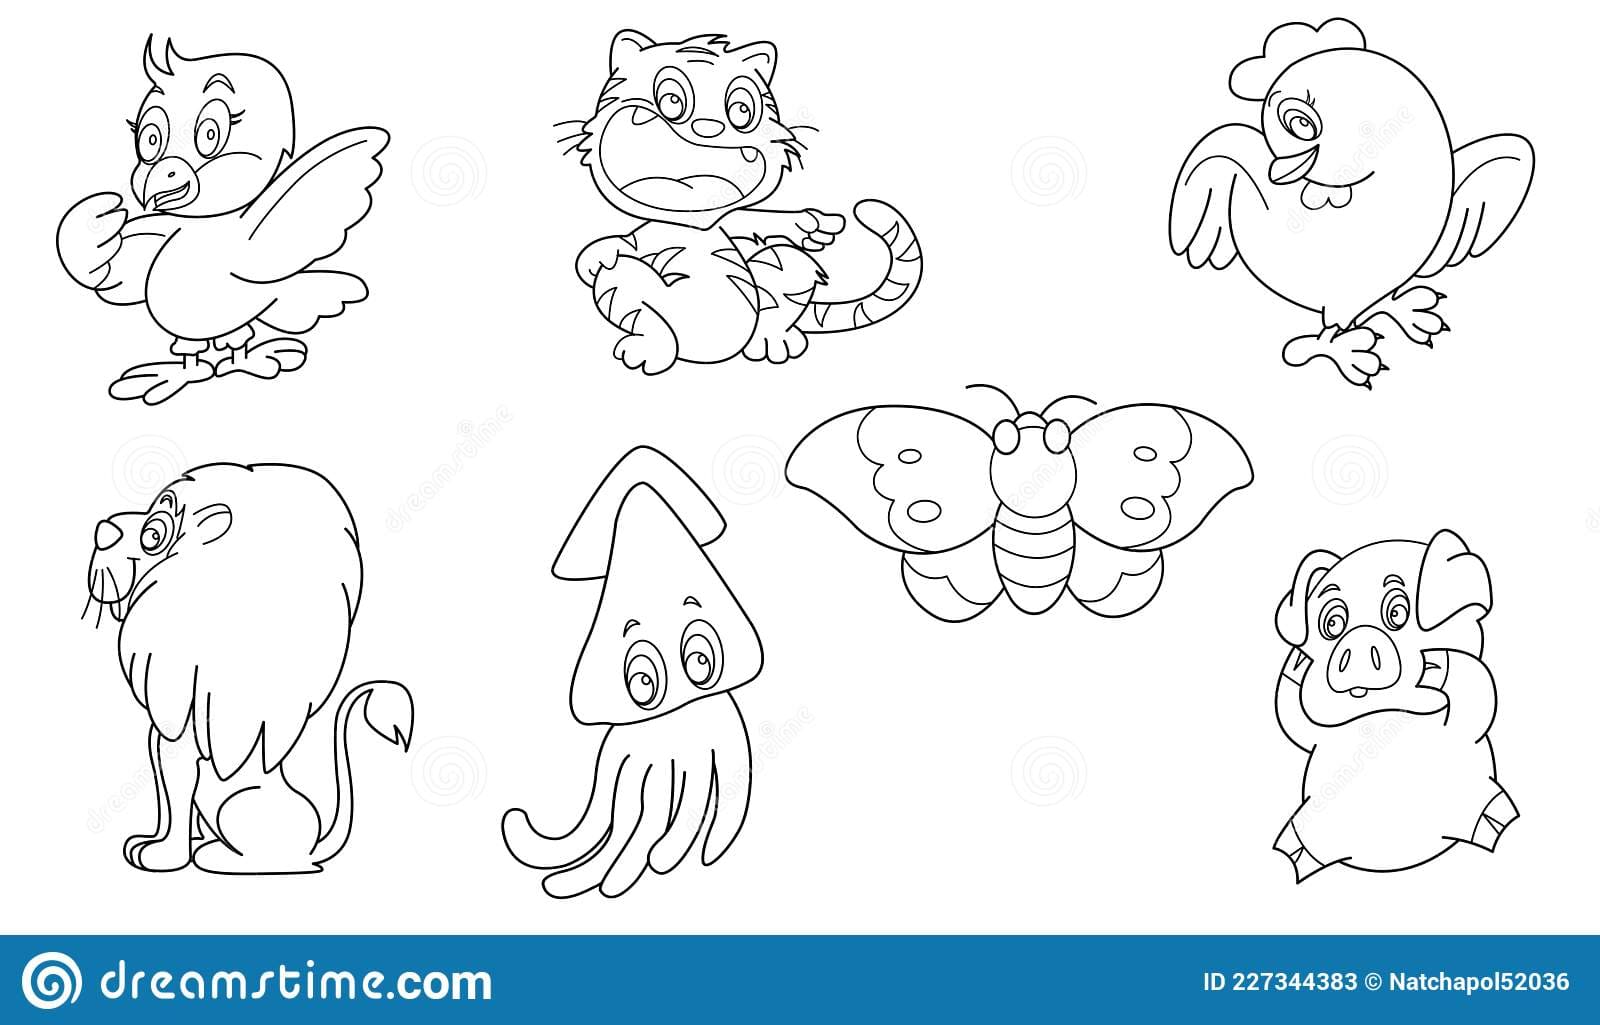 Cute Design Animal Outline Coloring Page